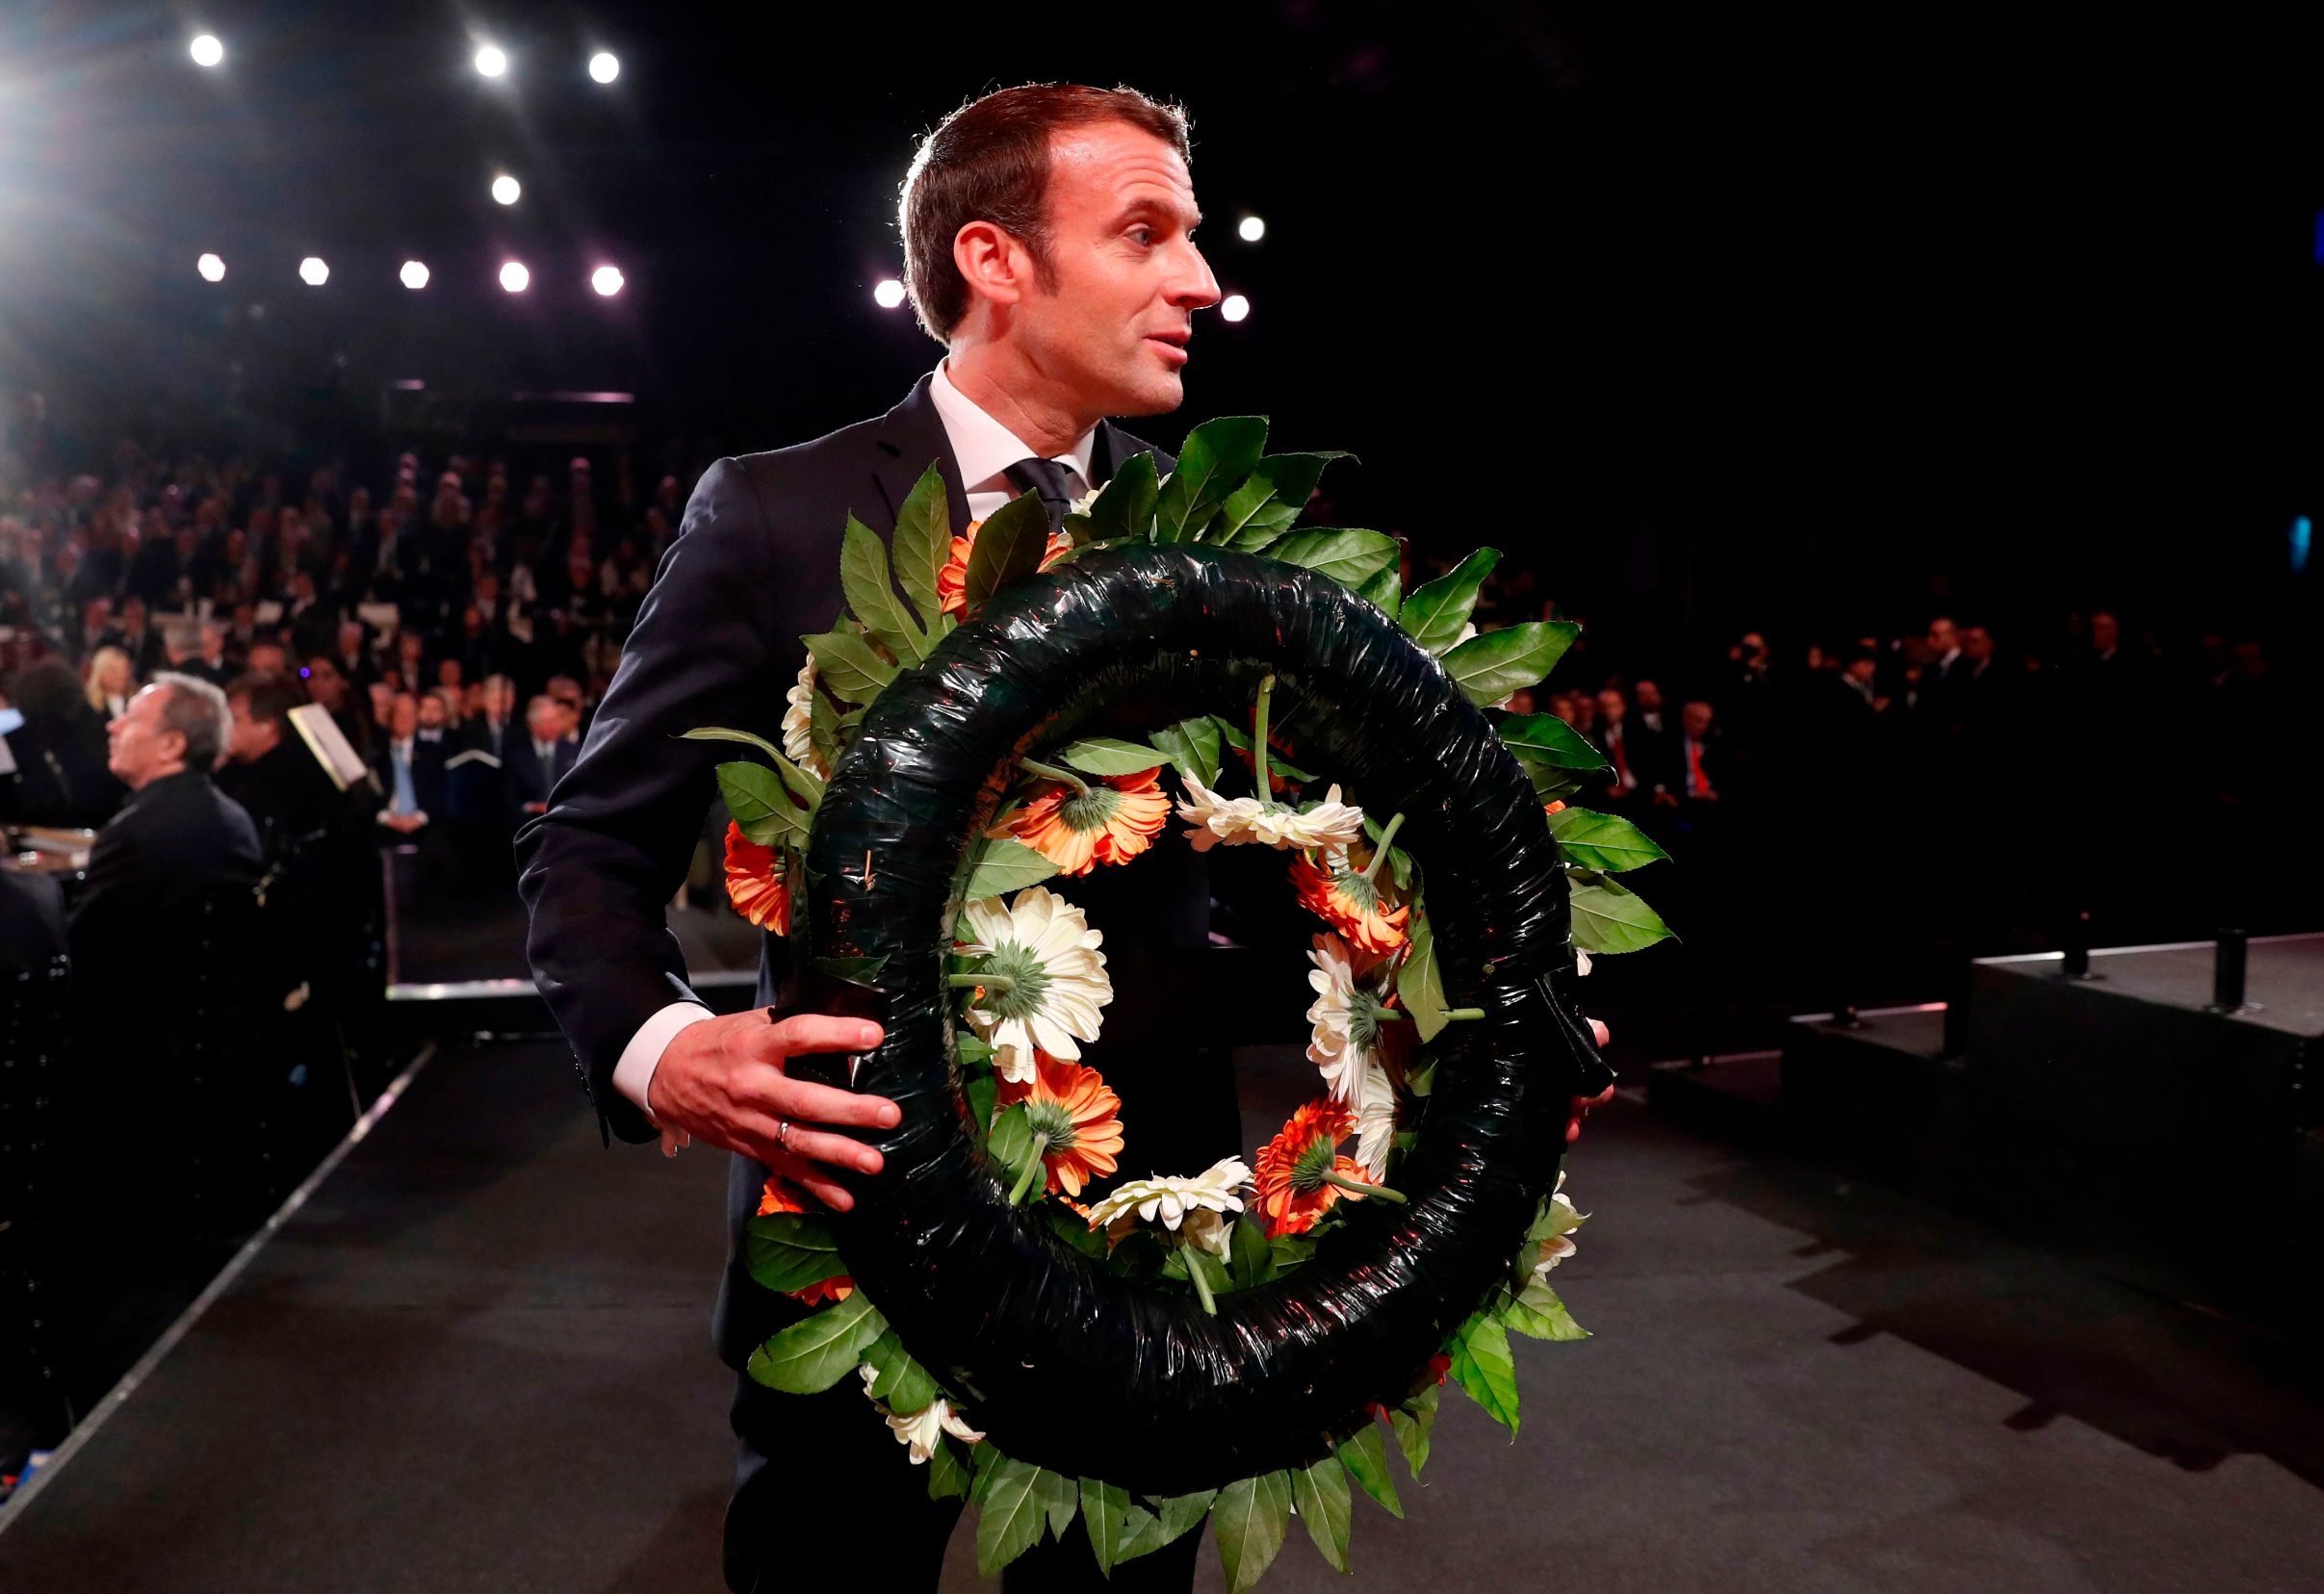 French President Emmanuel Macron lays a wreath during the Fifth World Holocaust Forum at the Yad Vashem Holocaust memorial museum in Jerusalem on January 23, 2020. - World leaders travelled to Israel this week to mark 75 years since the Red Army liberated Auschwitz, the extermination camp where the Nazis killed over a million Jews. (Photo by RONEN ZVULUN / POOL / AFP)